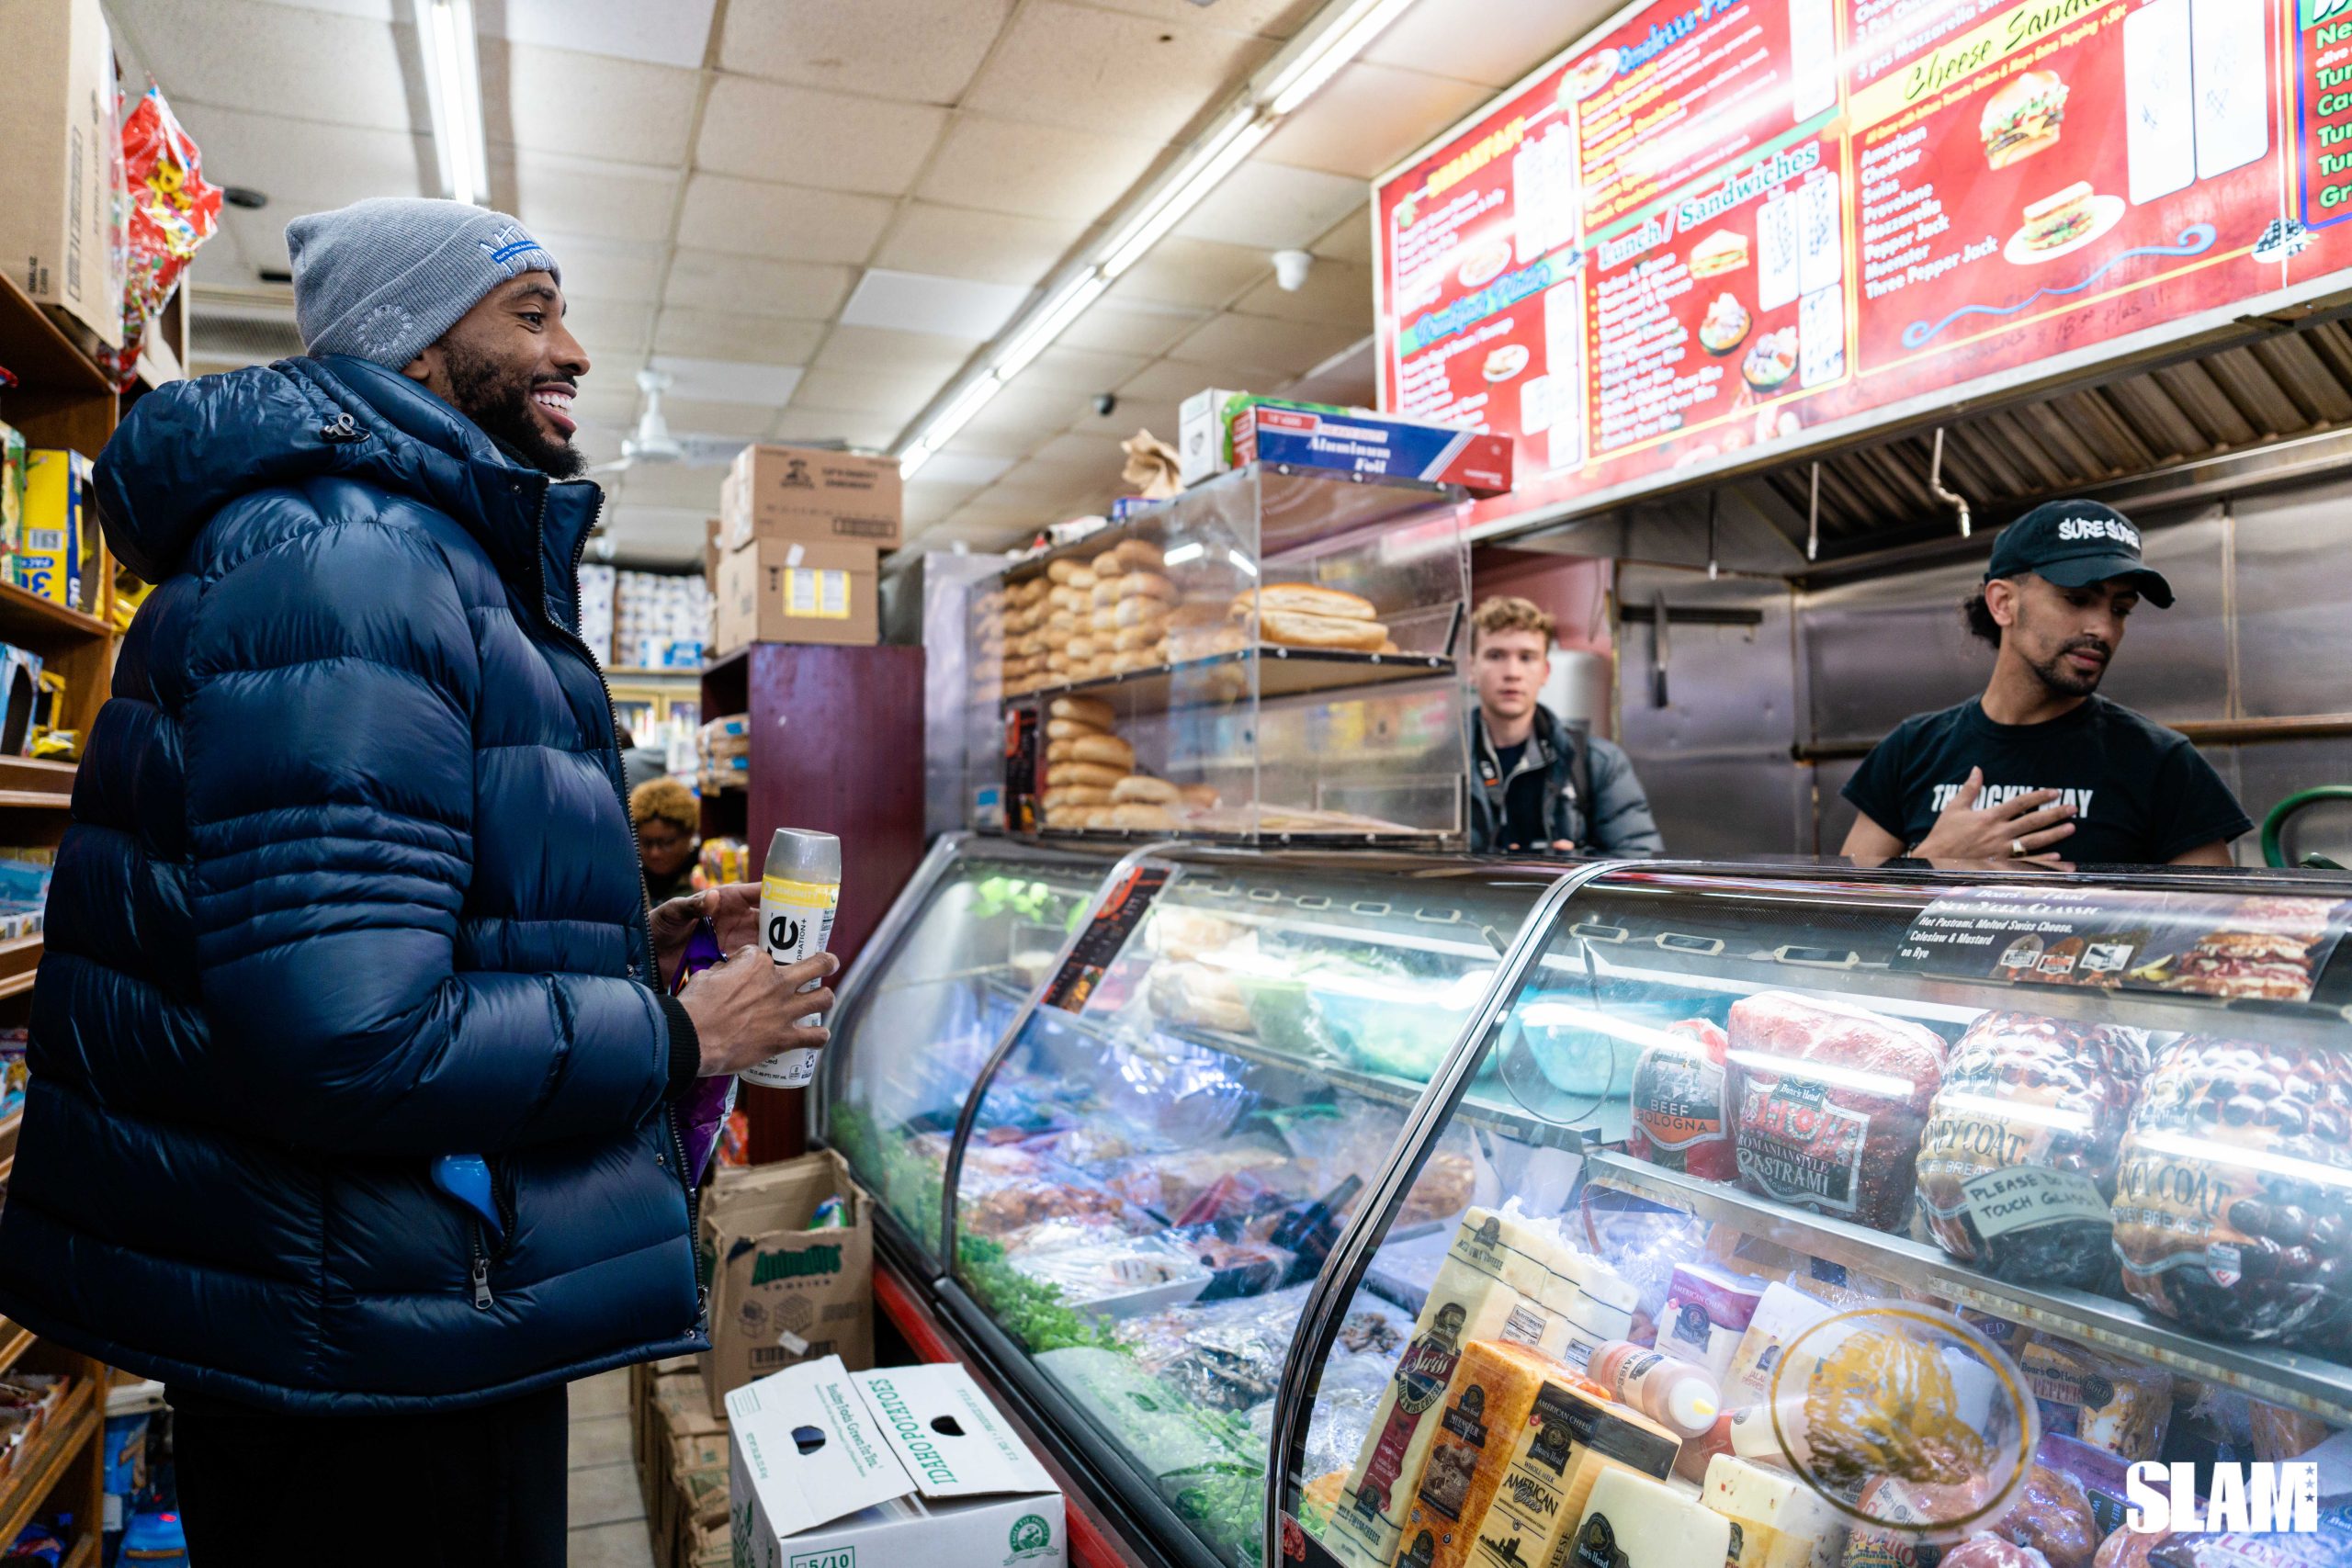 WATCH: We took Nets Star Mikal Bridges Around Brooklyn for His First-Ever Chopped Cheese, Subway Ride and More